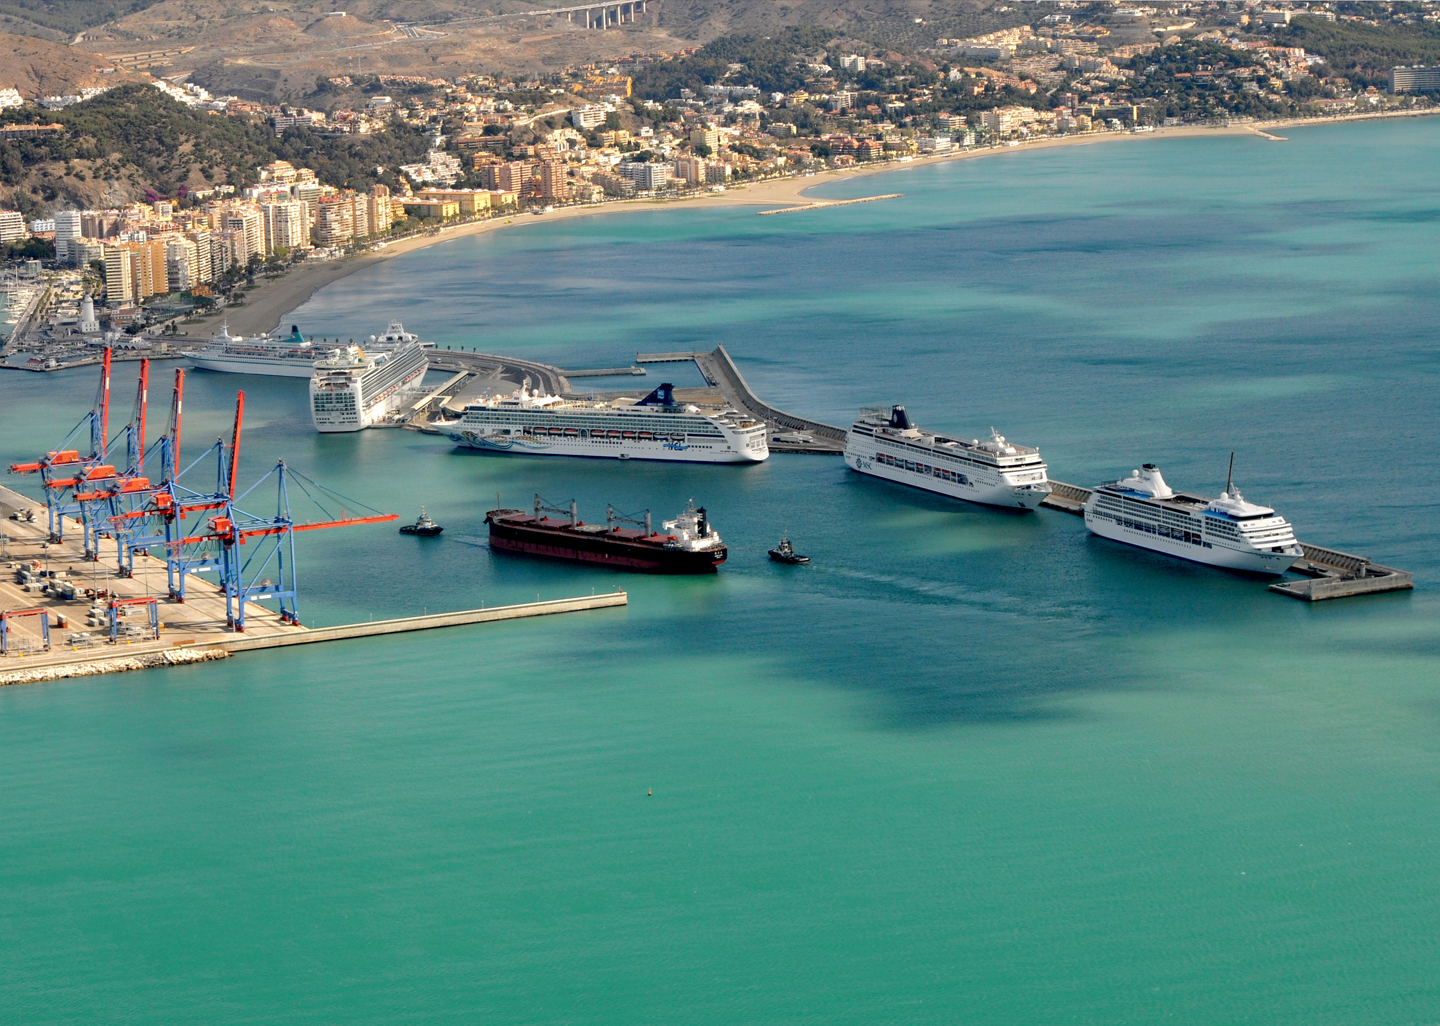 The high season of cruise traffic starts in the Port of Málaga